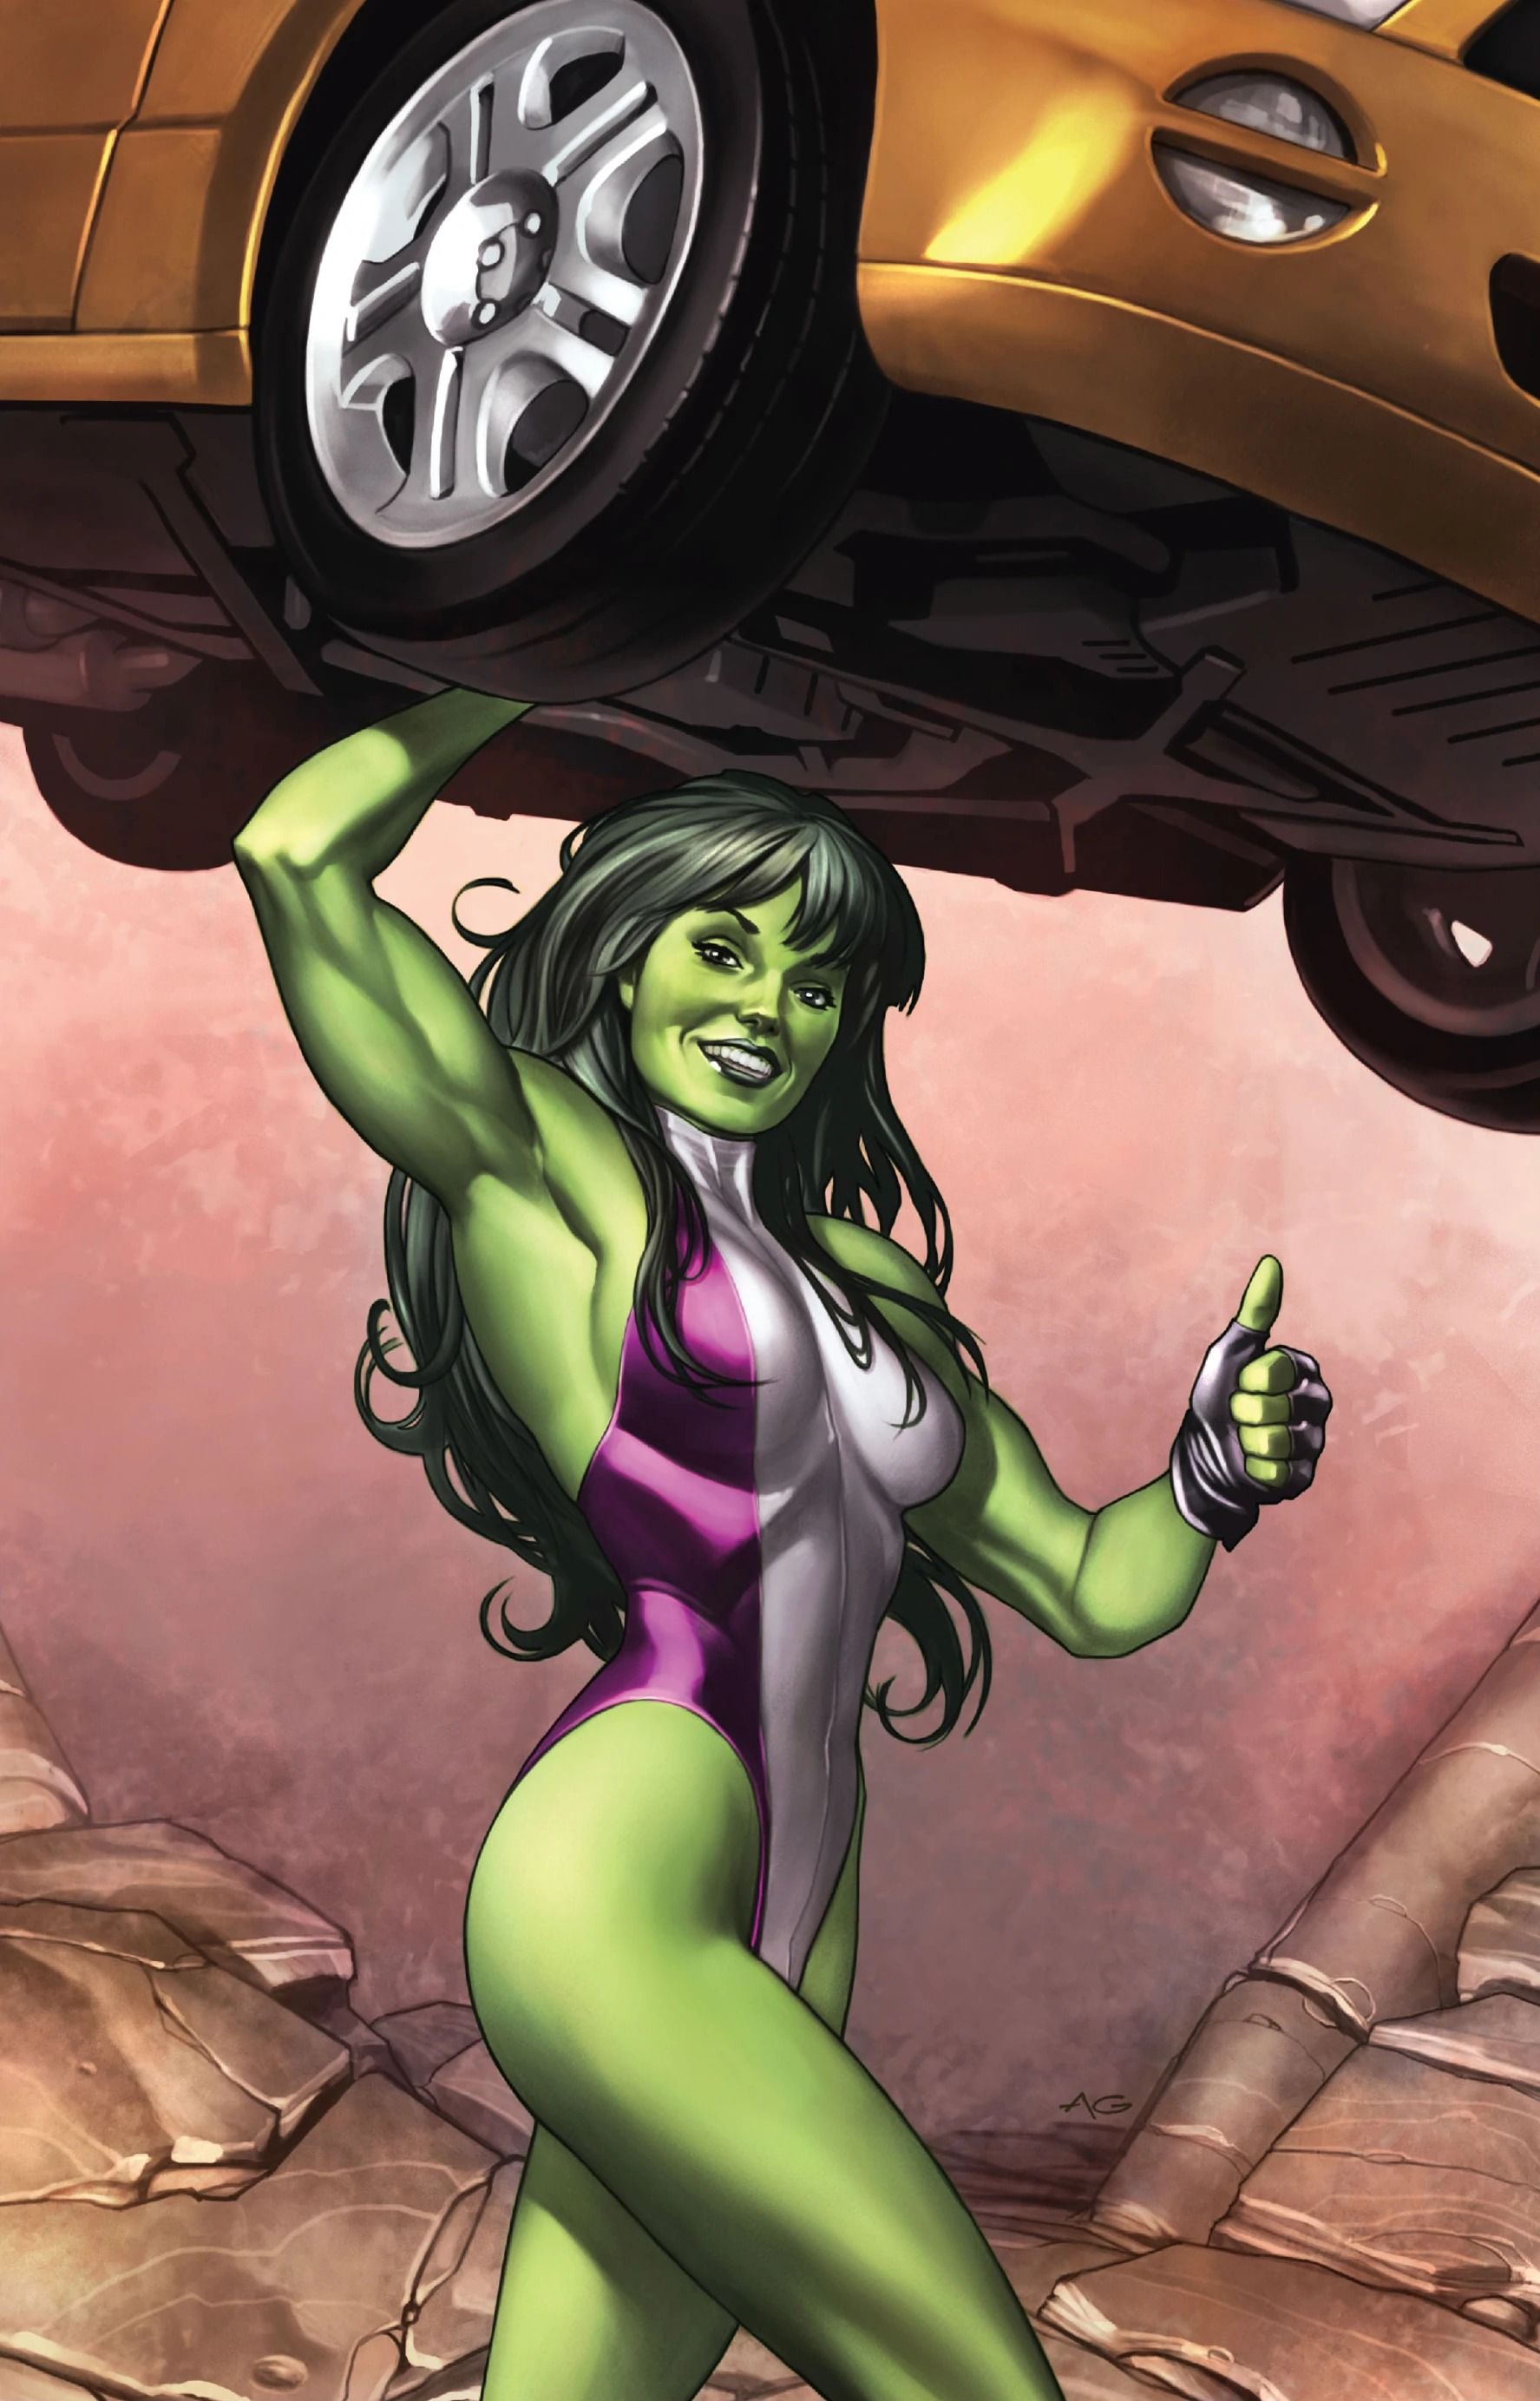 10 Best She-Hulk Comics to Read With Disney+ Marvel Show